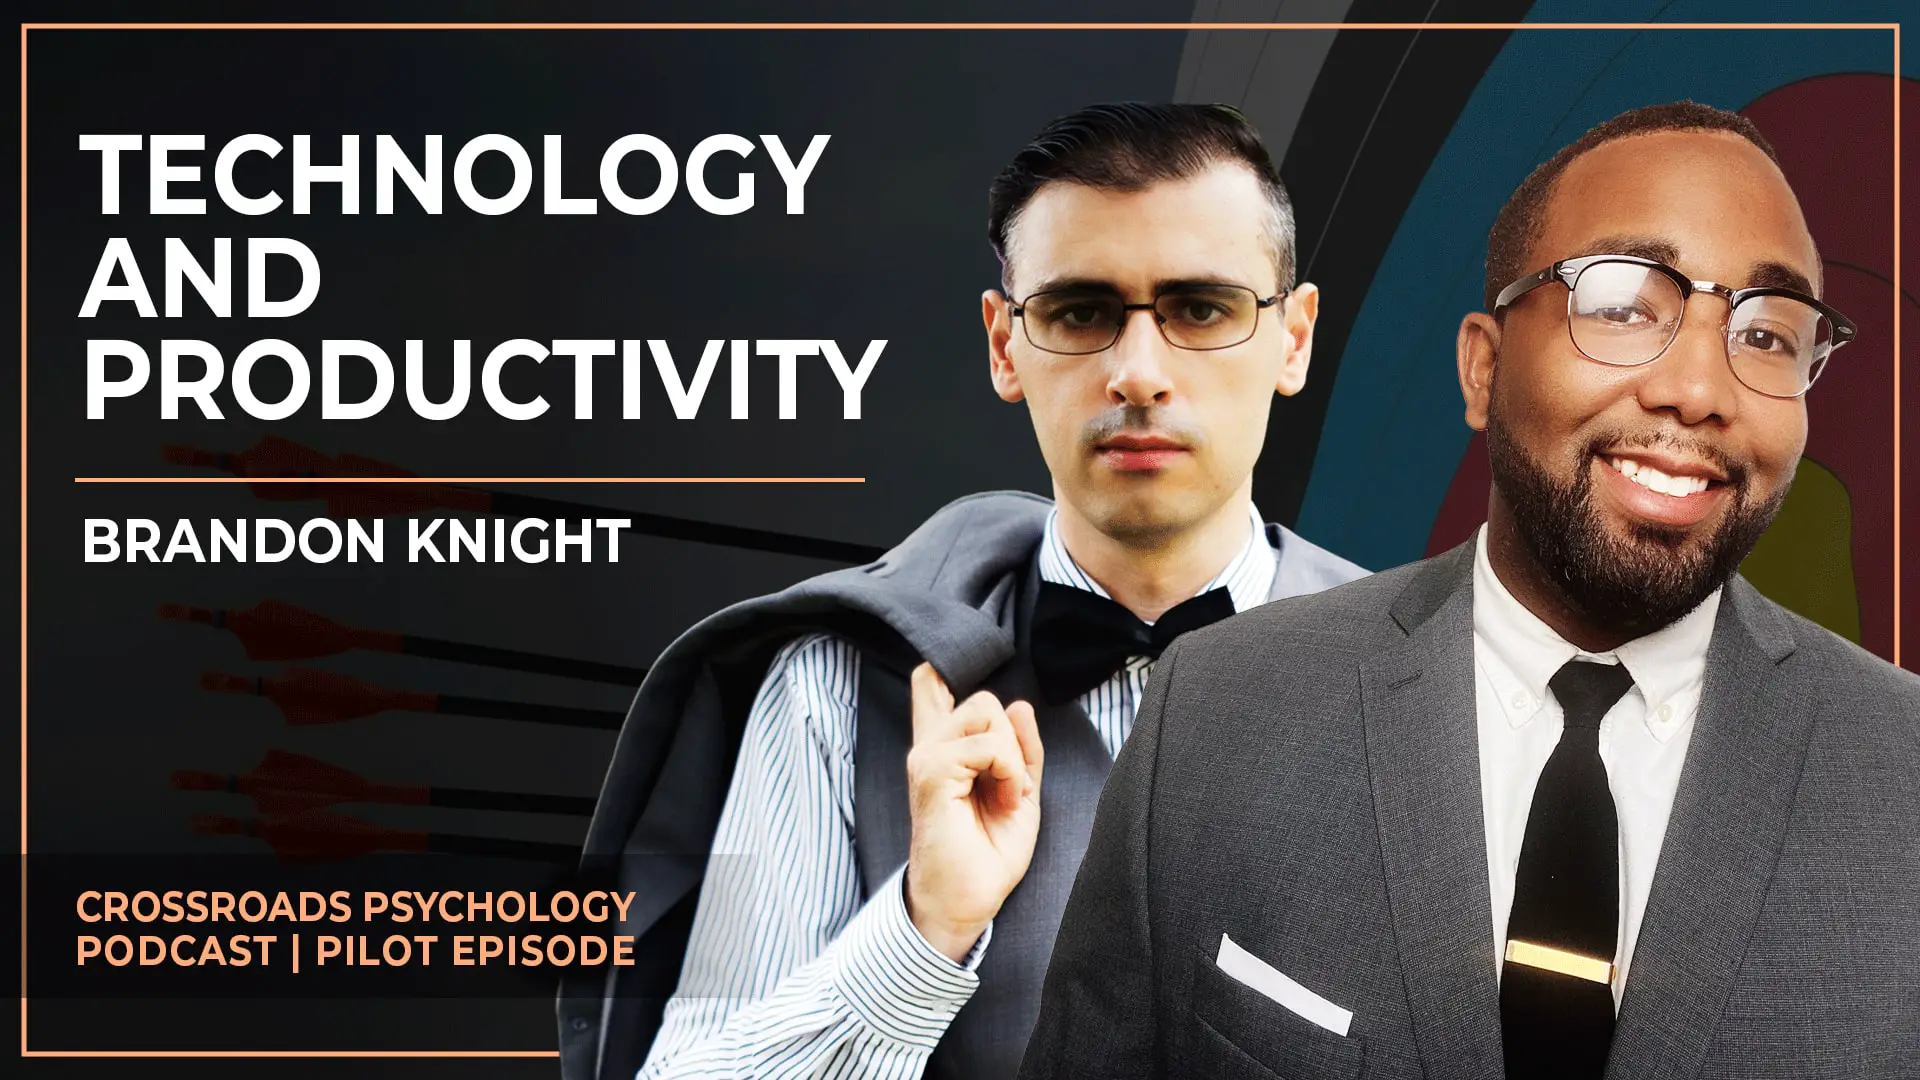 How to use TECHNOLOGY to increase PRODUCTIVITY | Crossroads Psychology Podcast (Pilot Episode)